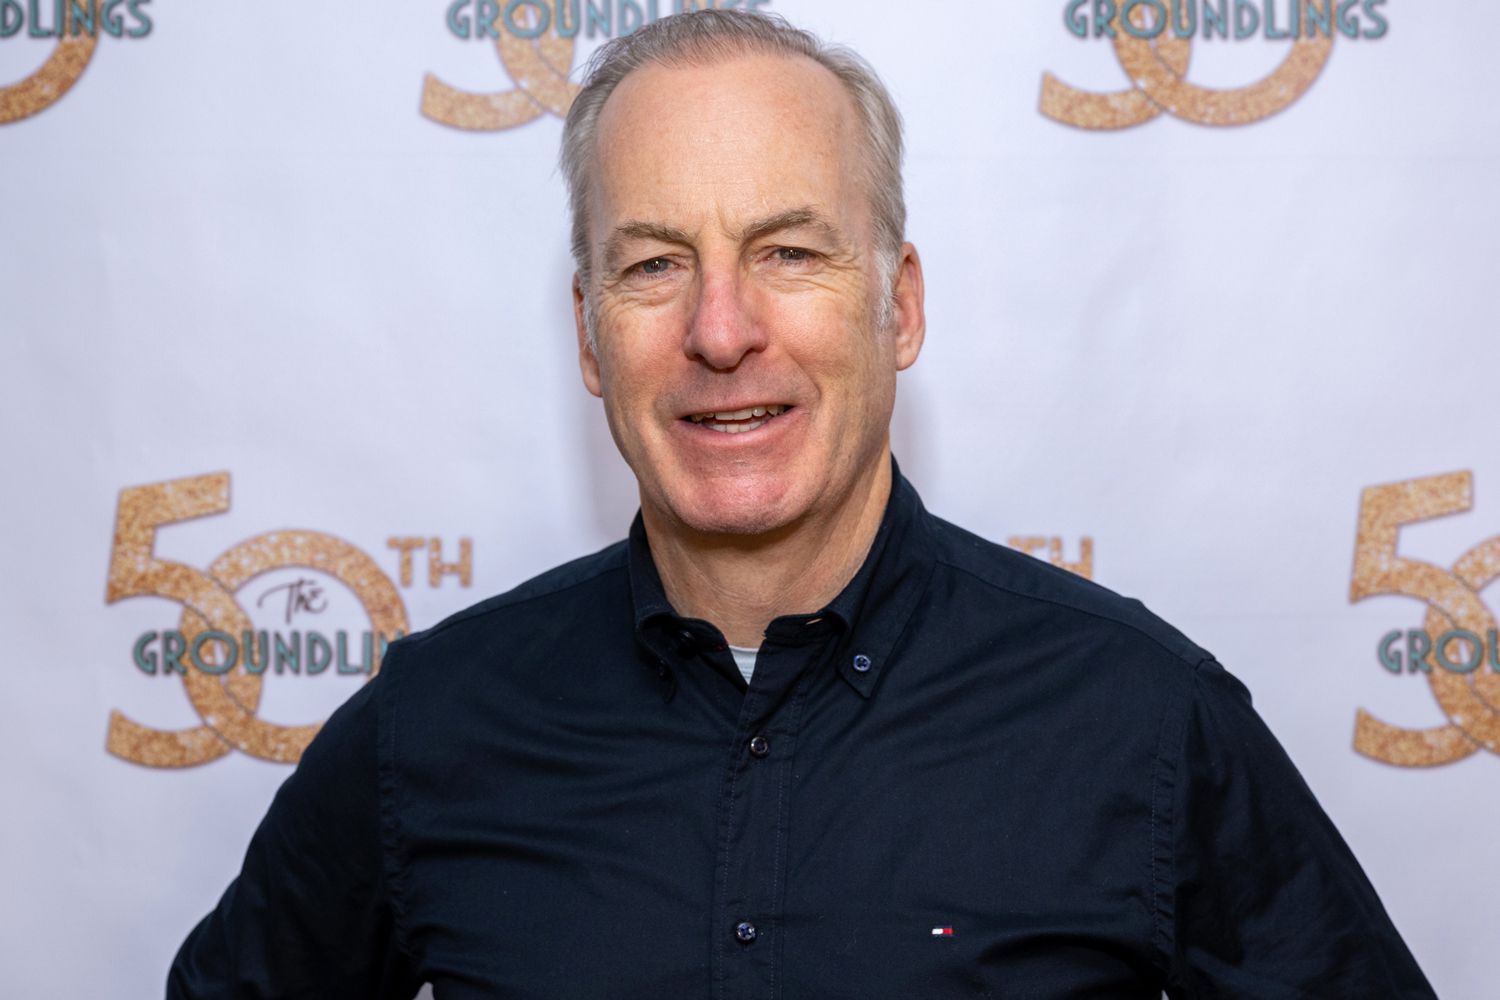 Bob Odenkirk Says On-Site Medic ‘Froze’ During His Heart Attack [Video]